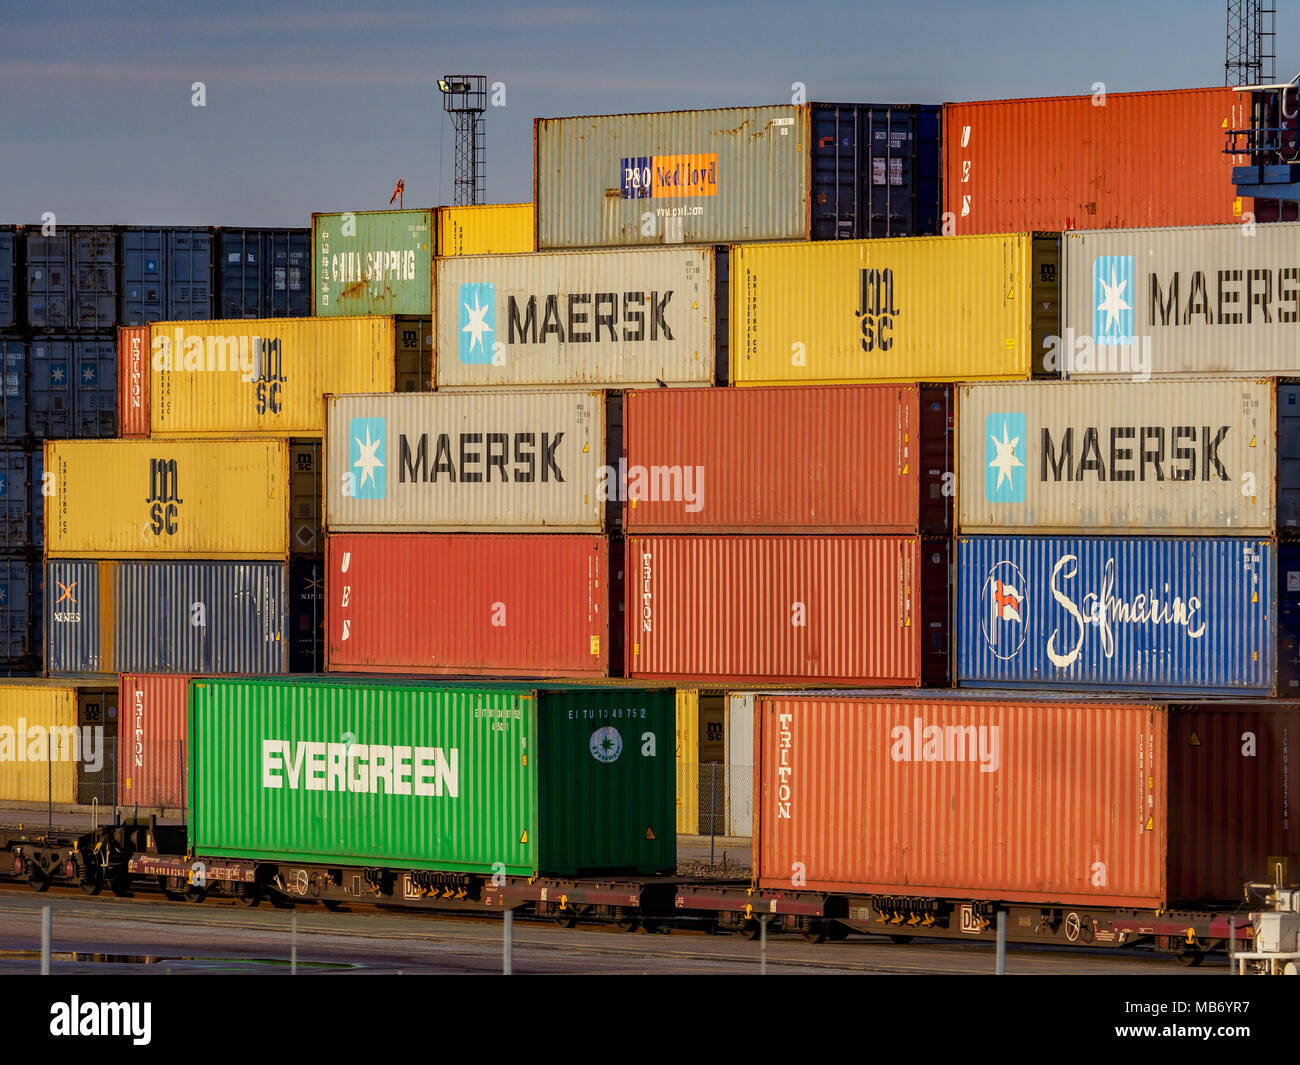 International Trade - Intermodal Container Traffic - Shipping Containers being loaded onto rail trucks at Felixstowe, the UK's largest container port Stock Photo